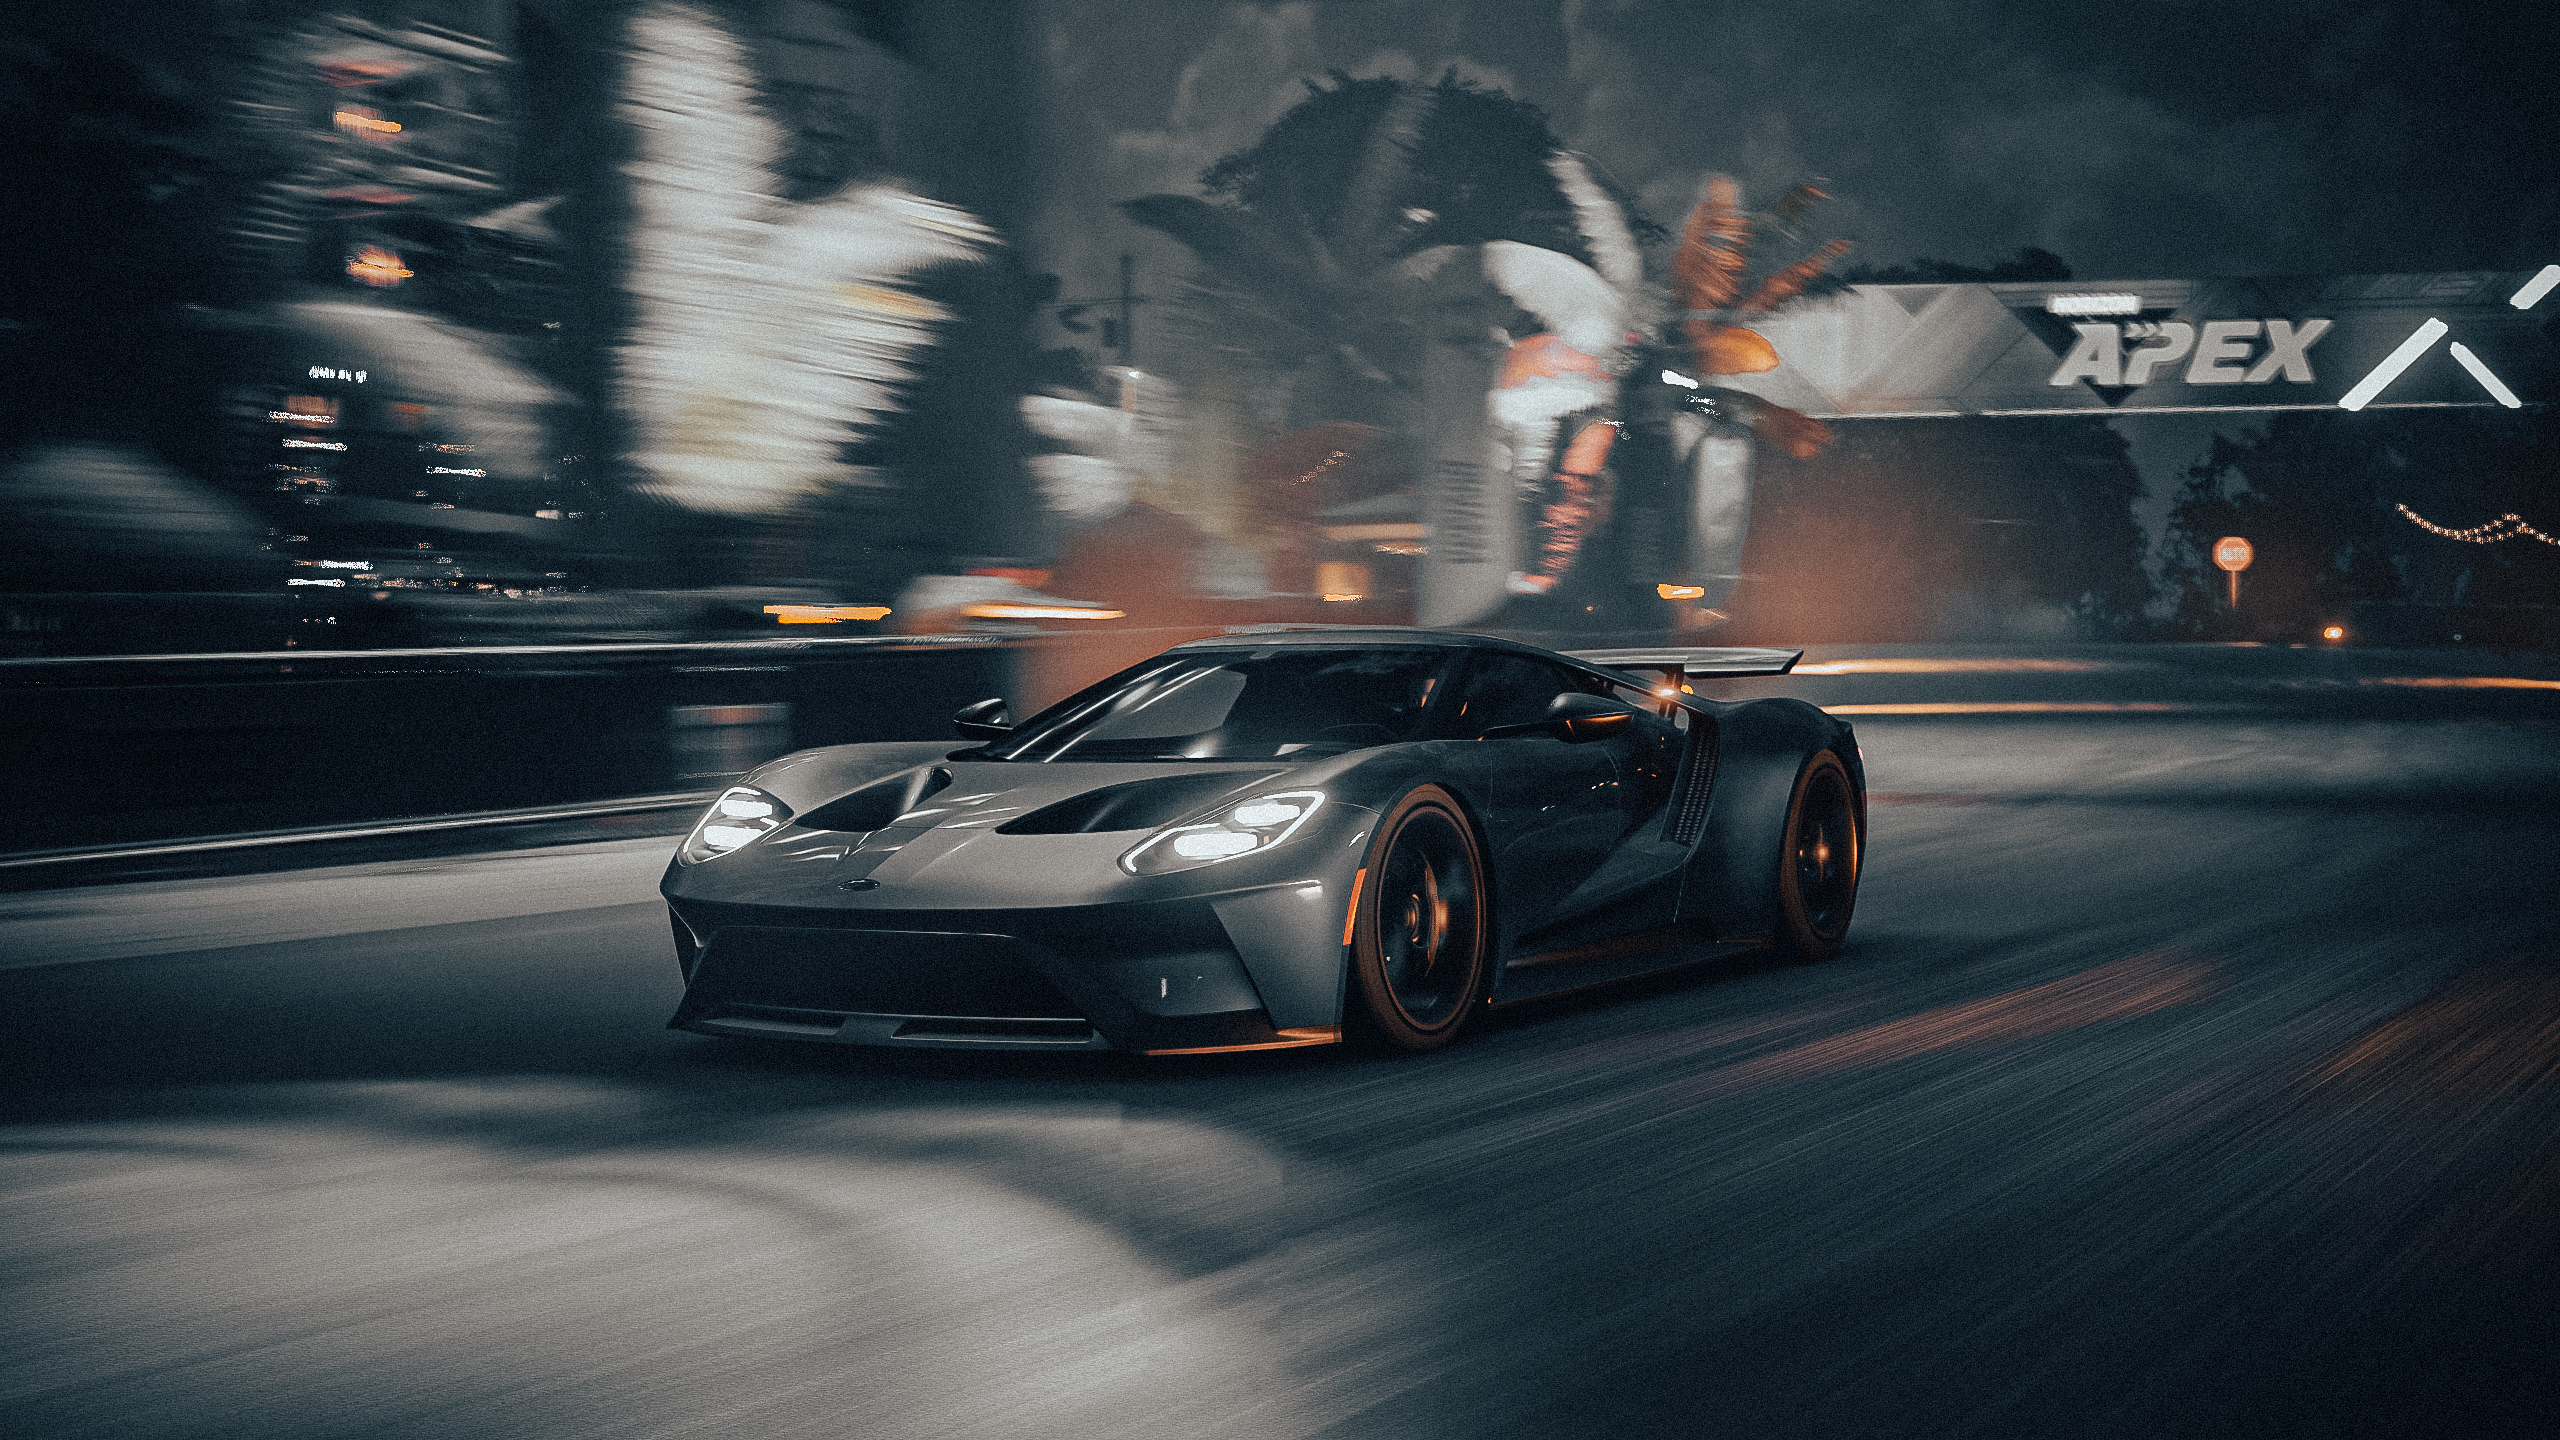 Black Ford GT sports car from the game forza horizon 5